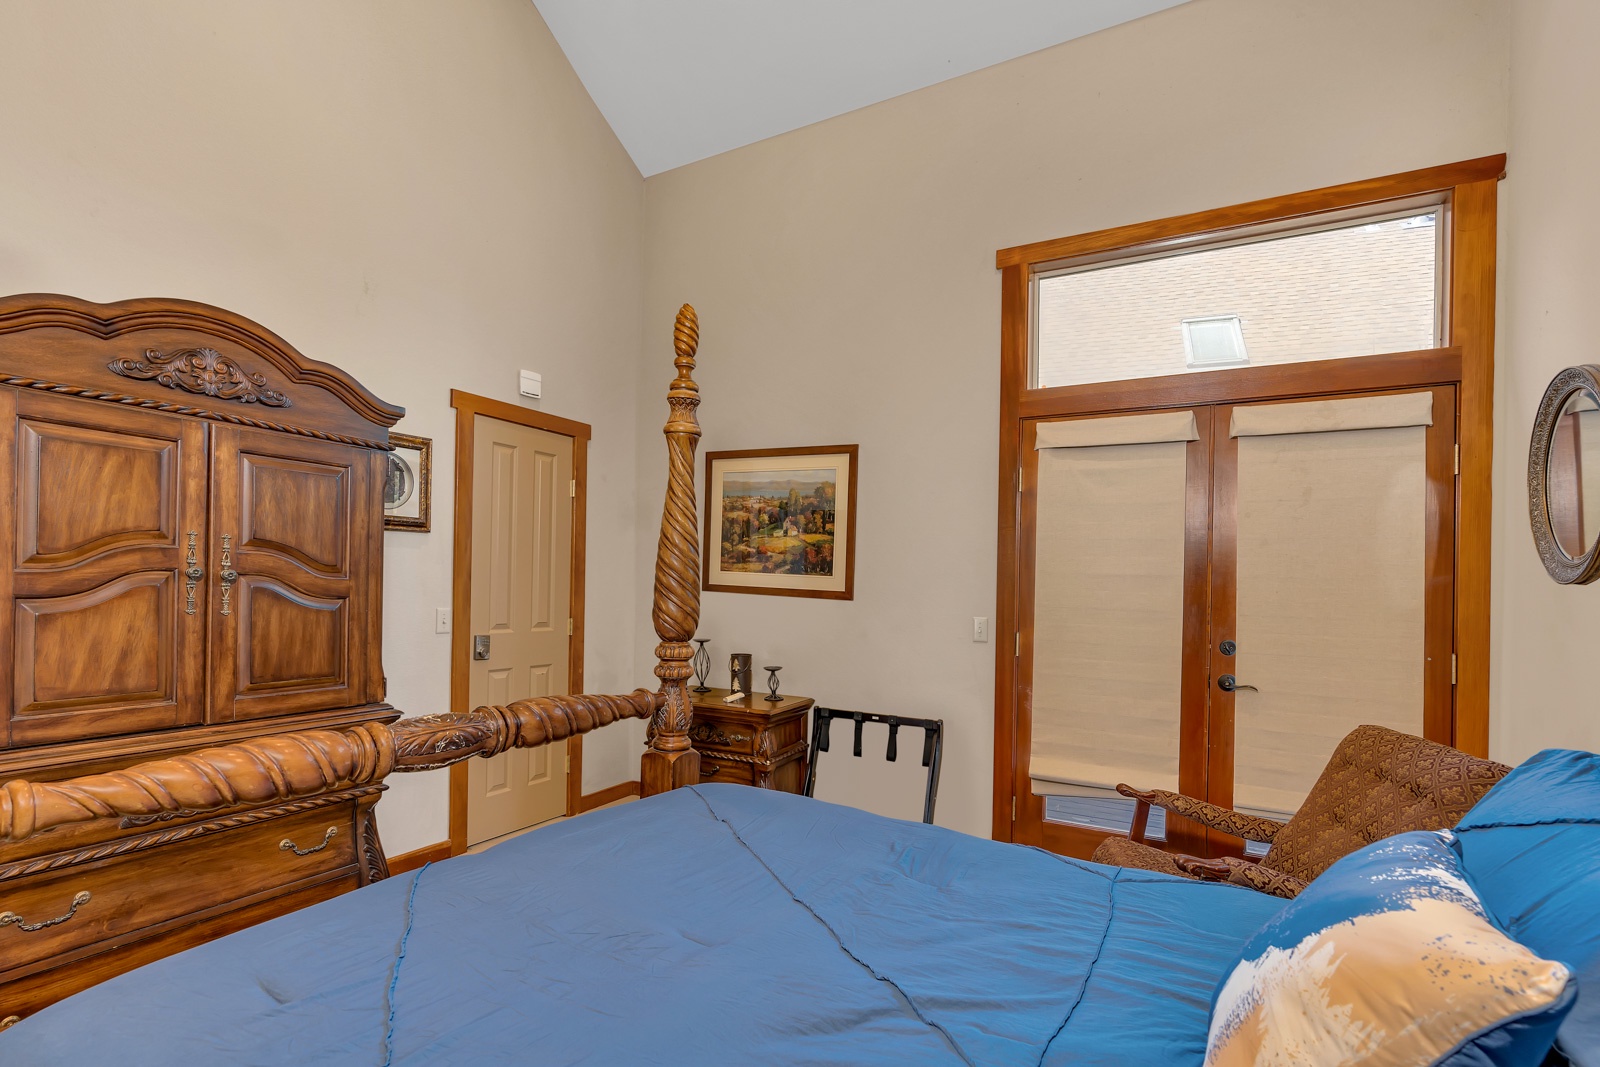 This 1st floor bedroom offers a queen bed, TV, & access to the back deck